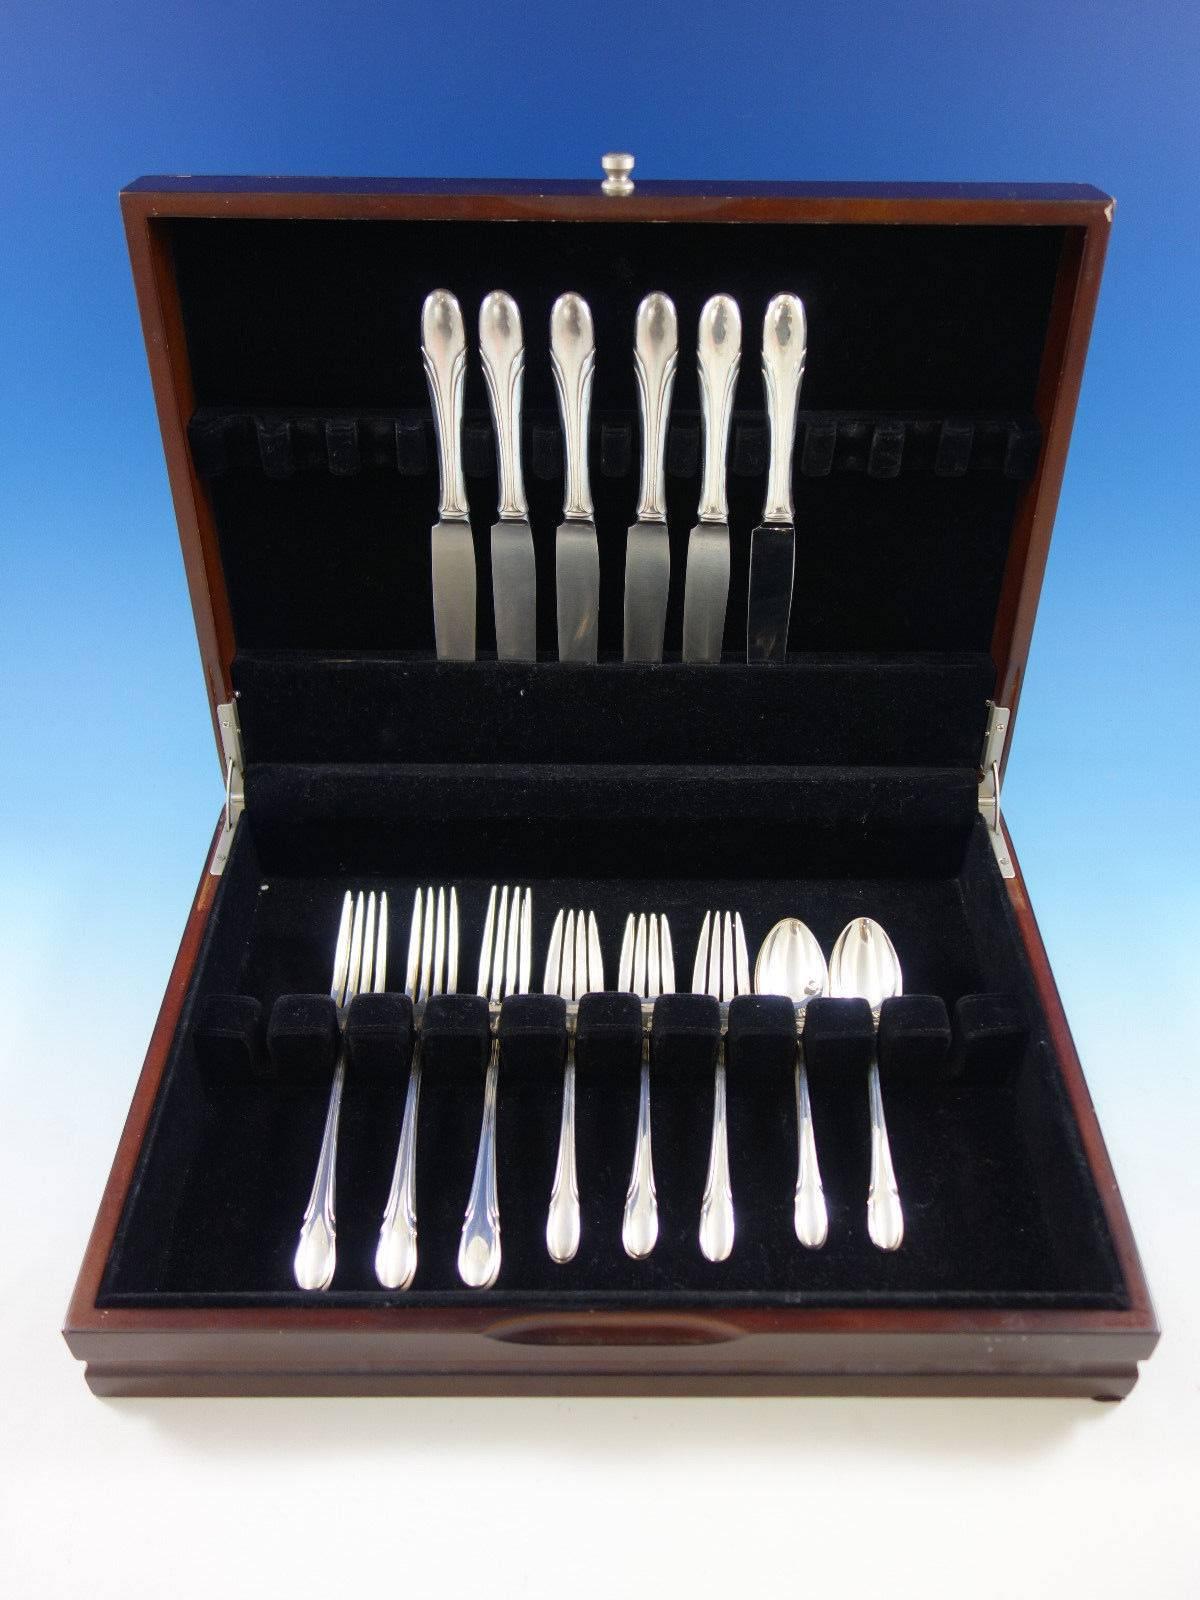 Symphony by Towle sterling silver flatware set of 24 pieces. This set includes: 

Six knives, 8 7/8